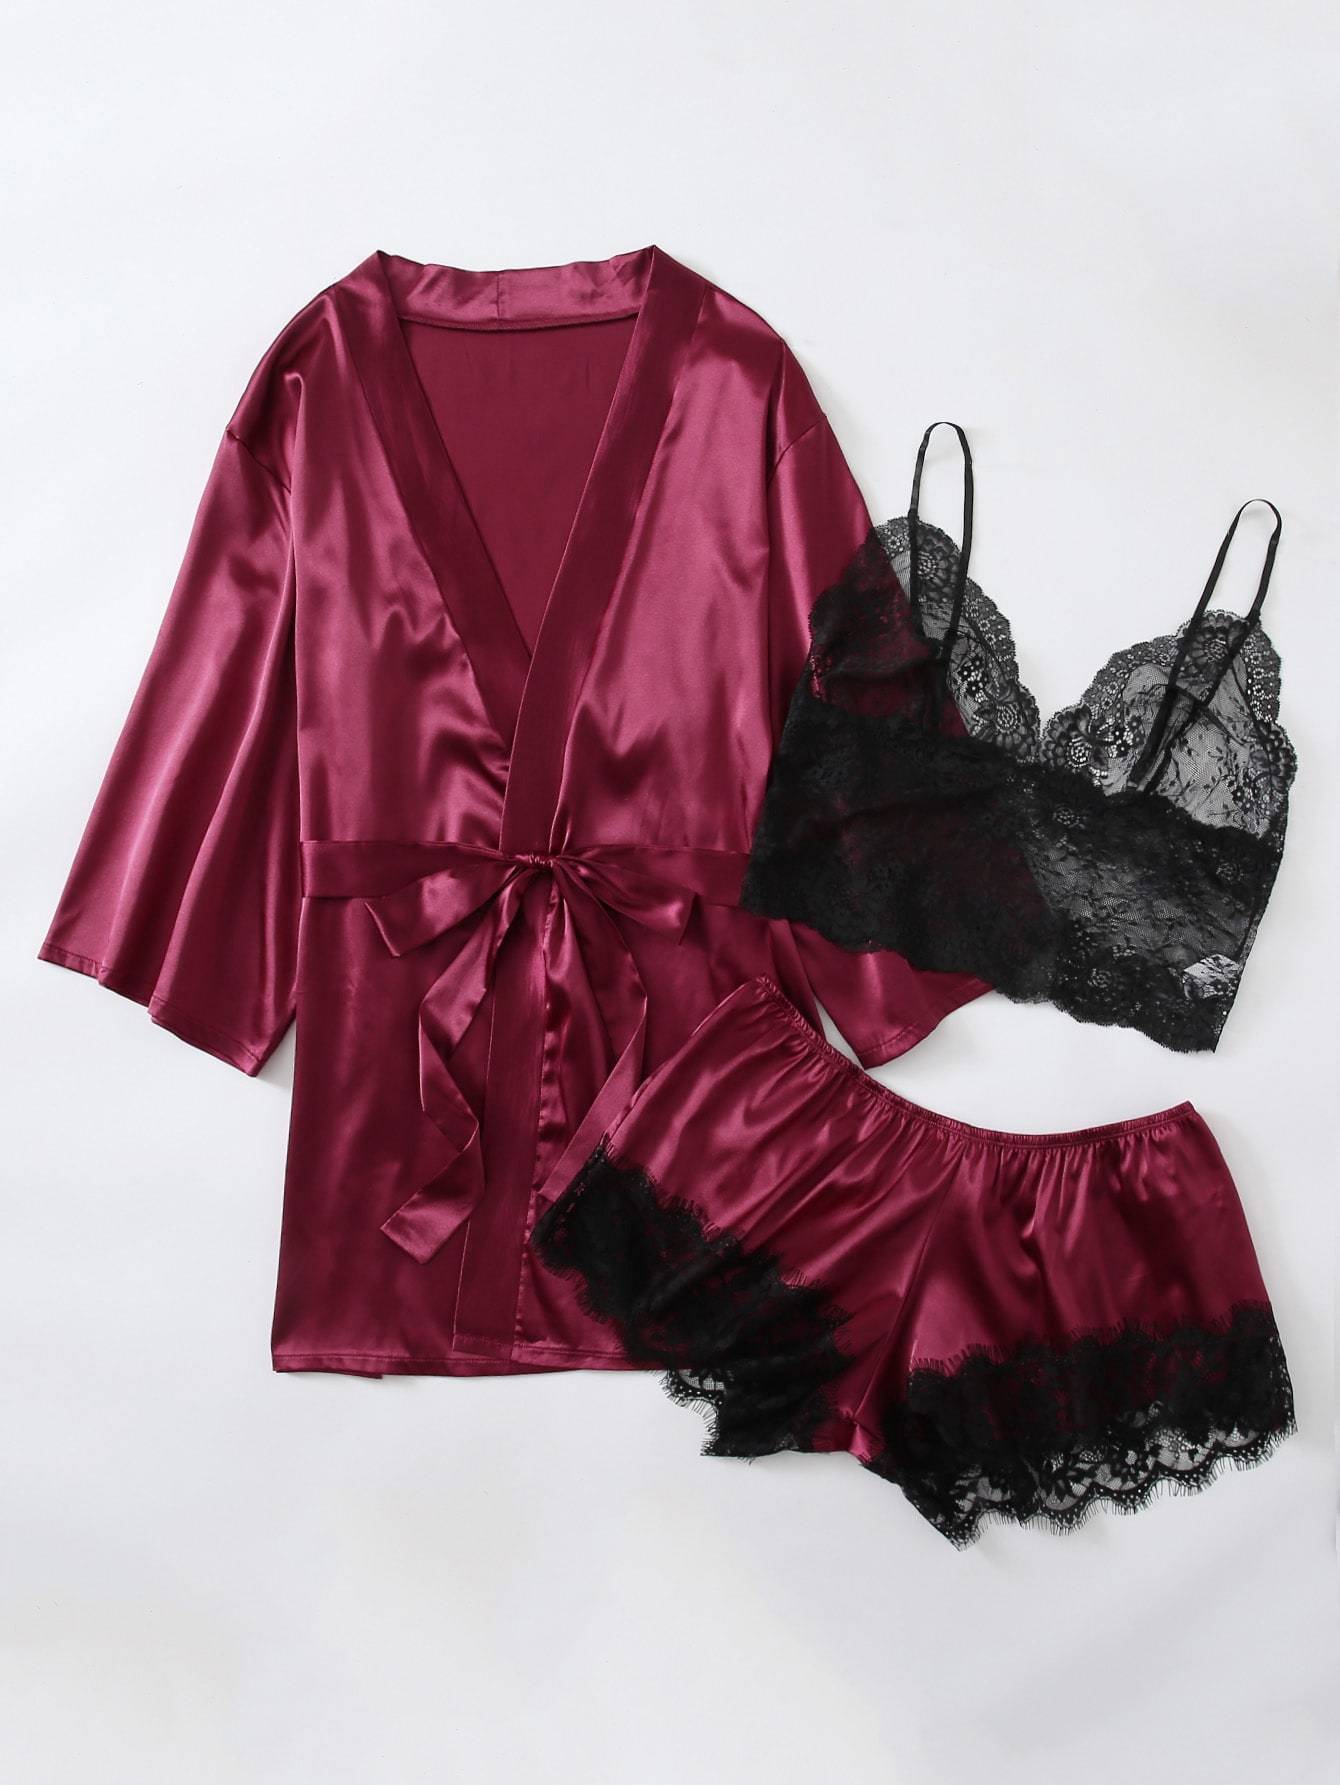 3pack Plus Contrast Lace Satin Lingerie Set & Robe - INS | Online Fashion Free Shipping Clothing, Dresses, Tops, Shoes